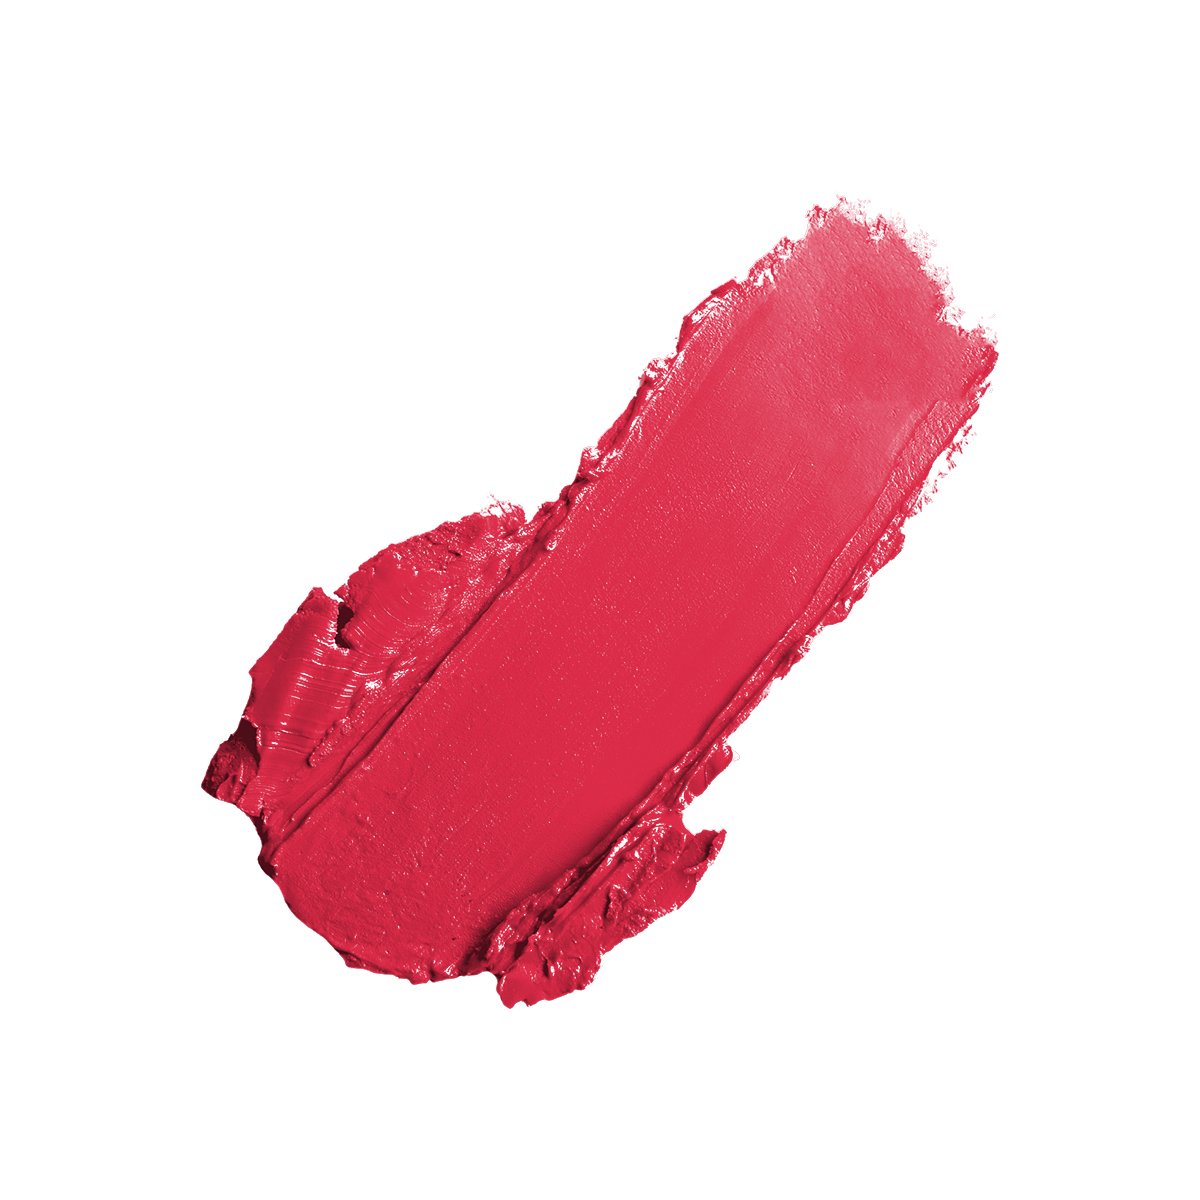 NOTE LONG WEARING LIPSTICK - 13 CHIC RASPBERRY - Halal Lipstick, Cruelty Free Lipstick, Paraben Free Lipstick, Vegan Lipstick, Lipstick, Long Lasting, Nourishing, Hydrating, Non-Transferable 